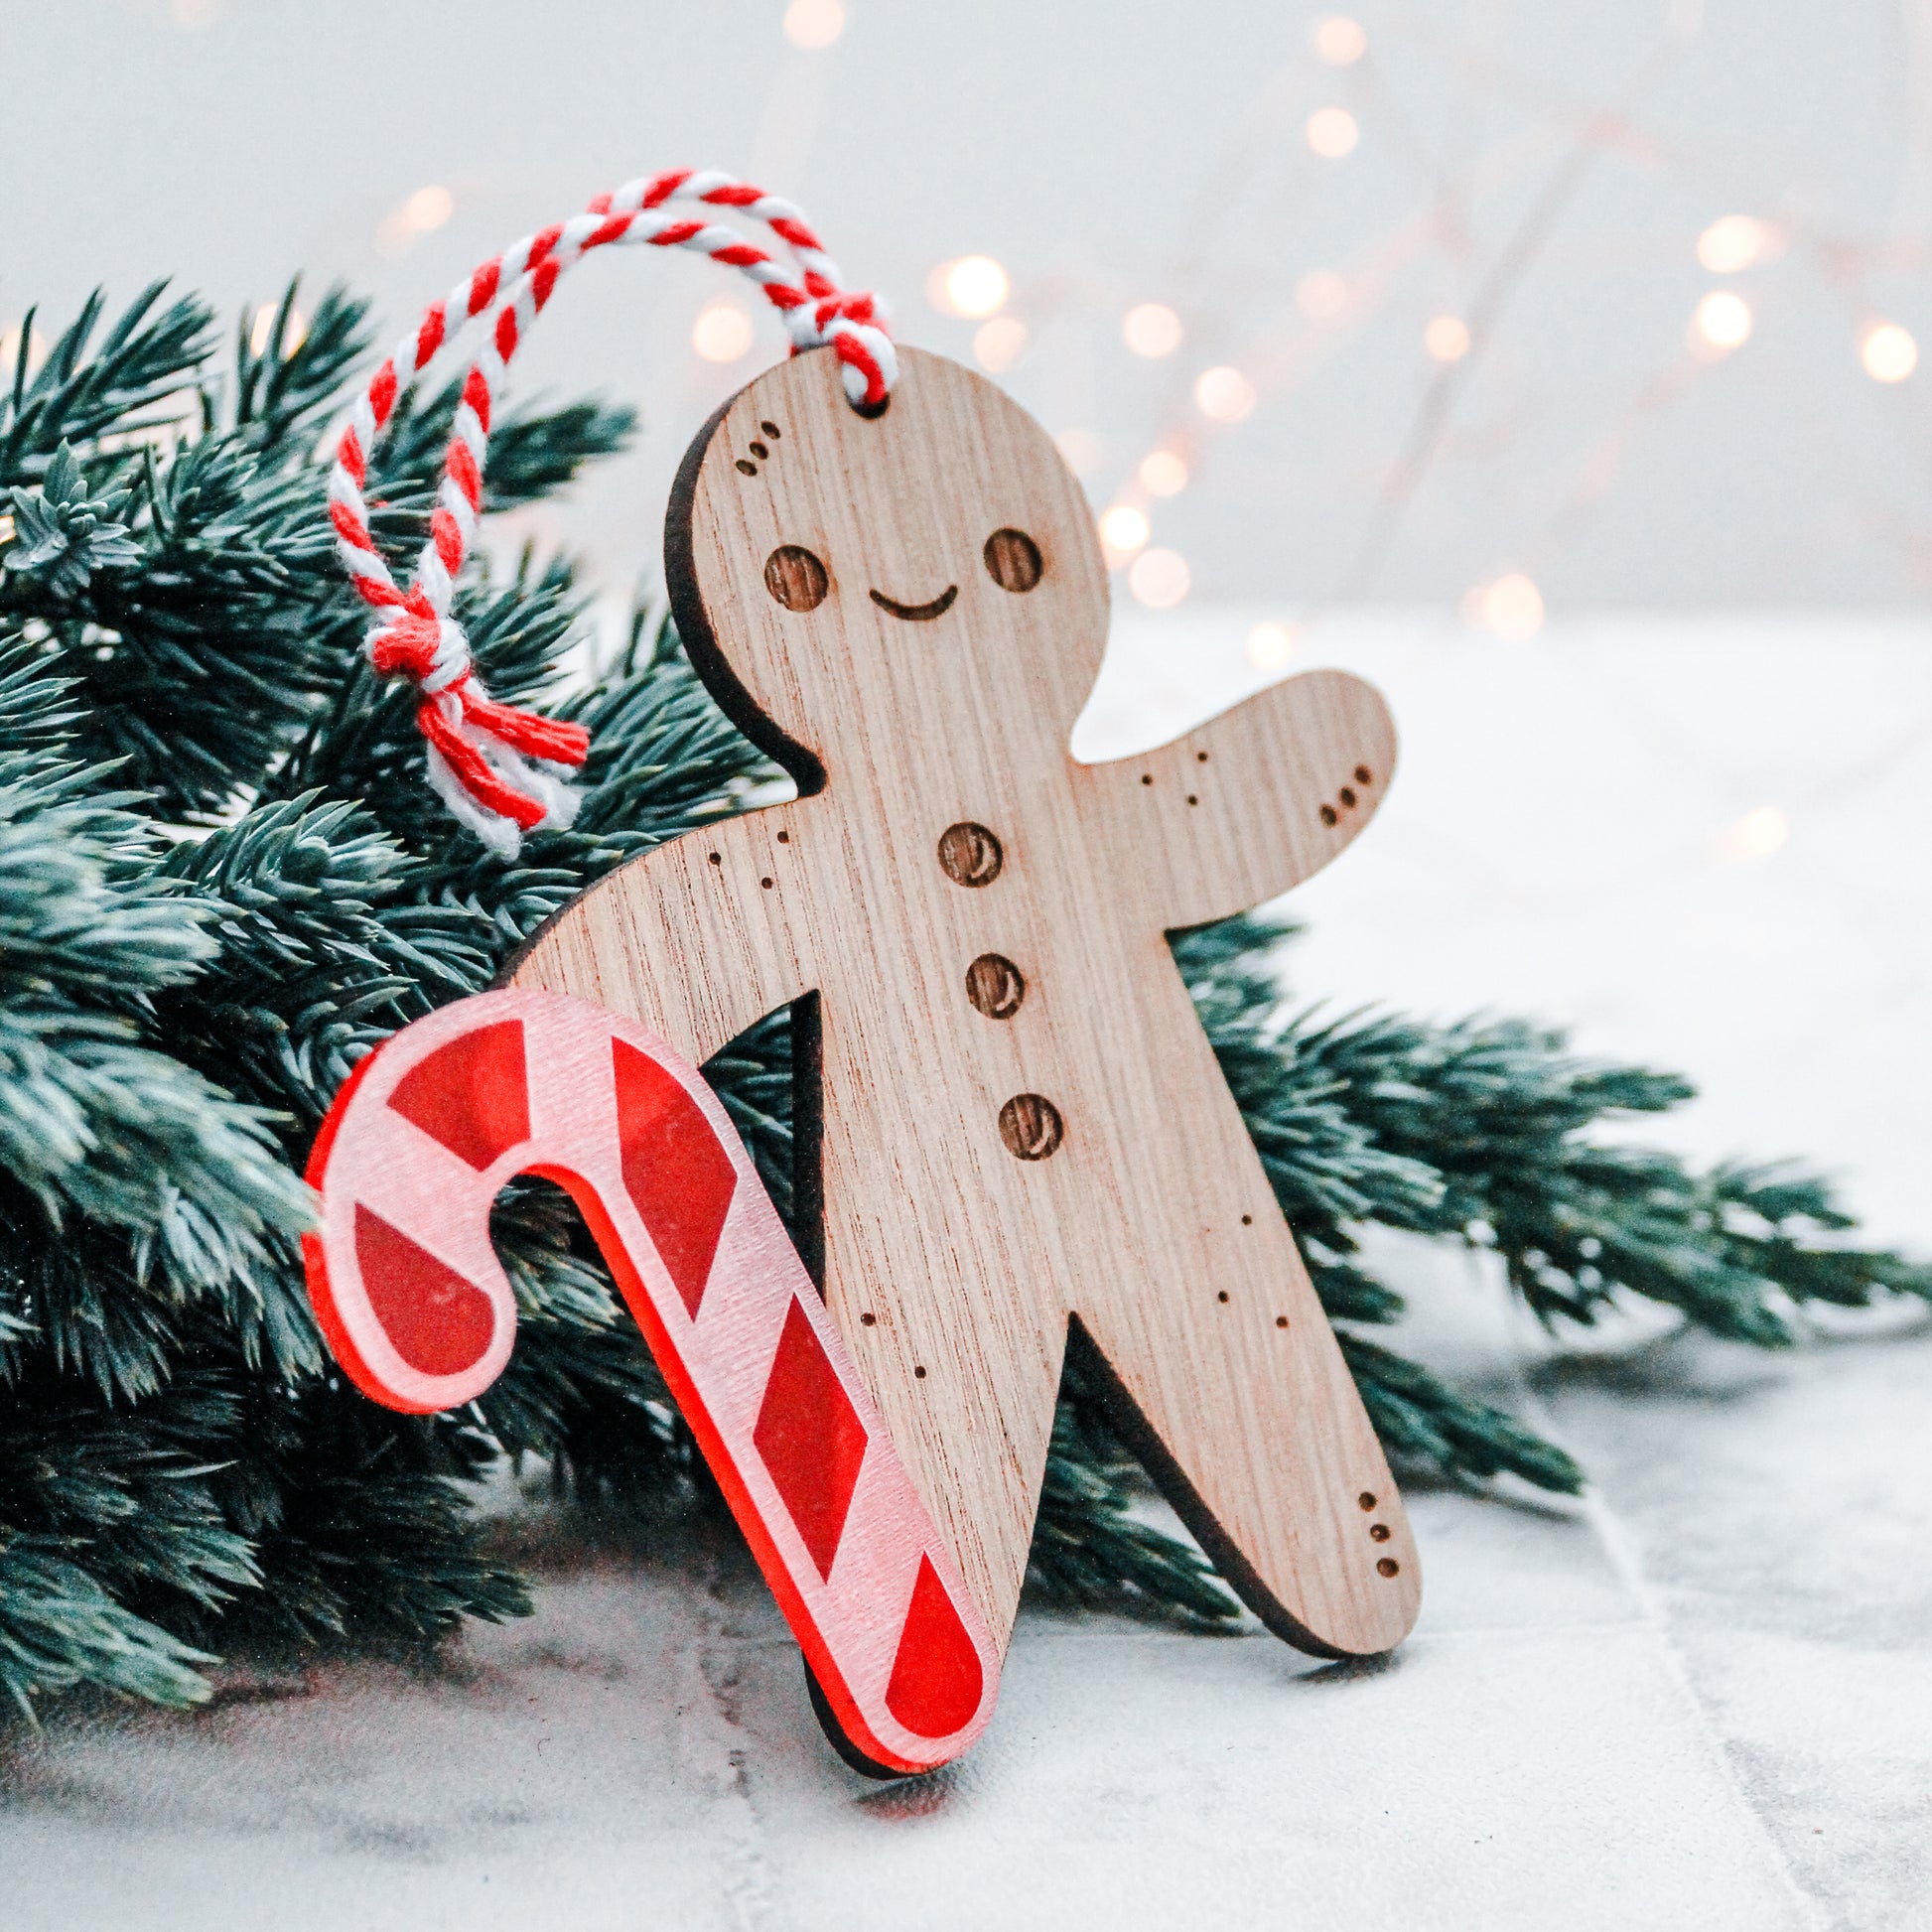 wooden cute Gingerbread man Christmas tree decoration with candy cane stick